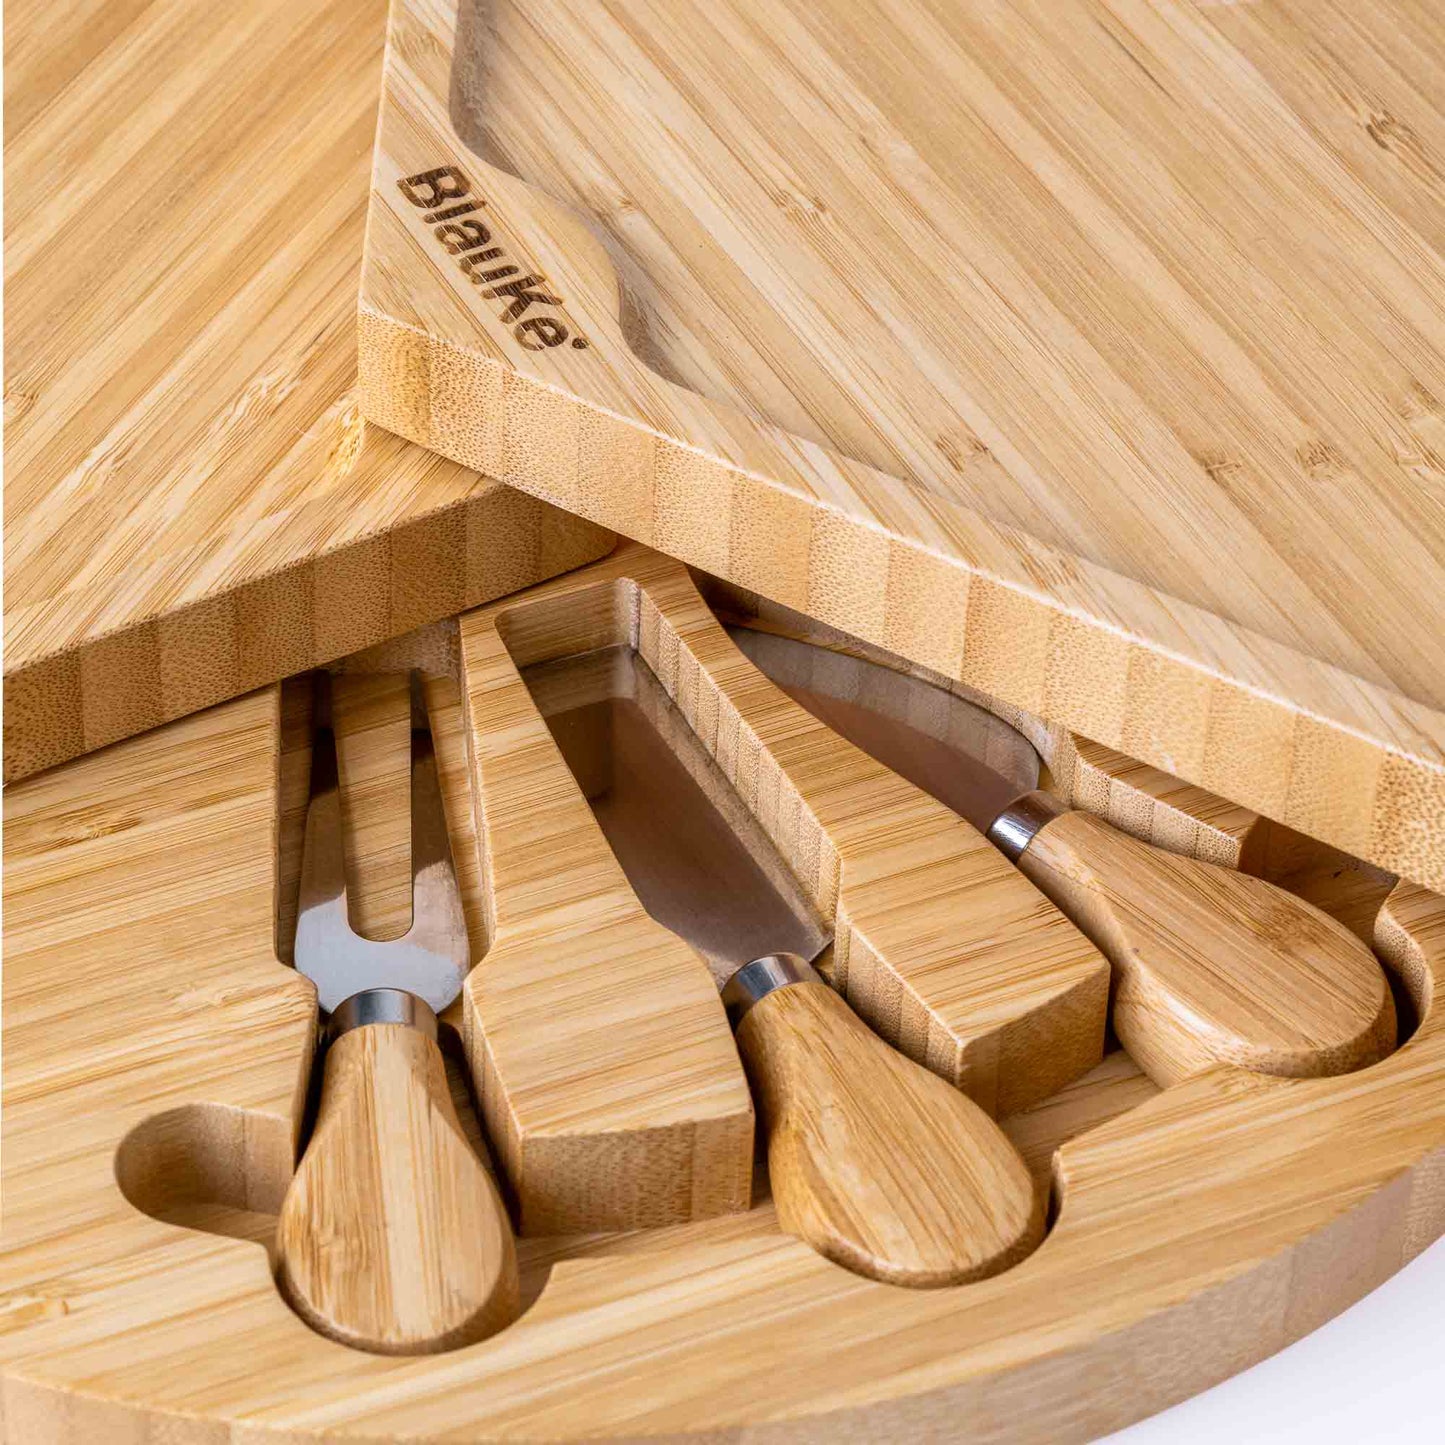 Bamboo Cheese Board and Knife Set - 14 Inch Swiveling Charcuterie